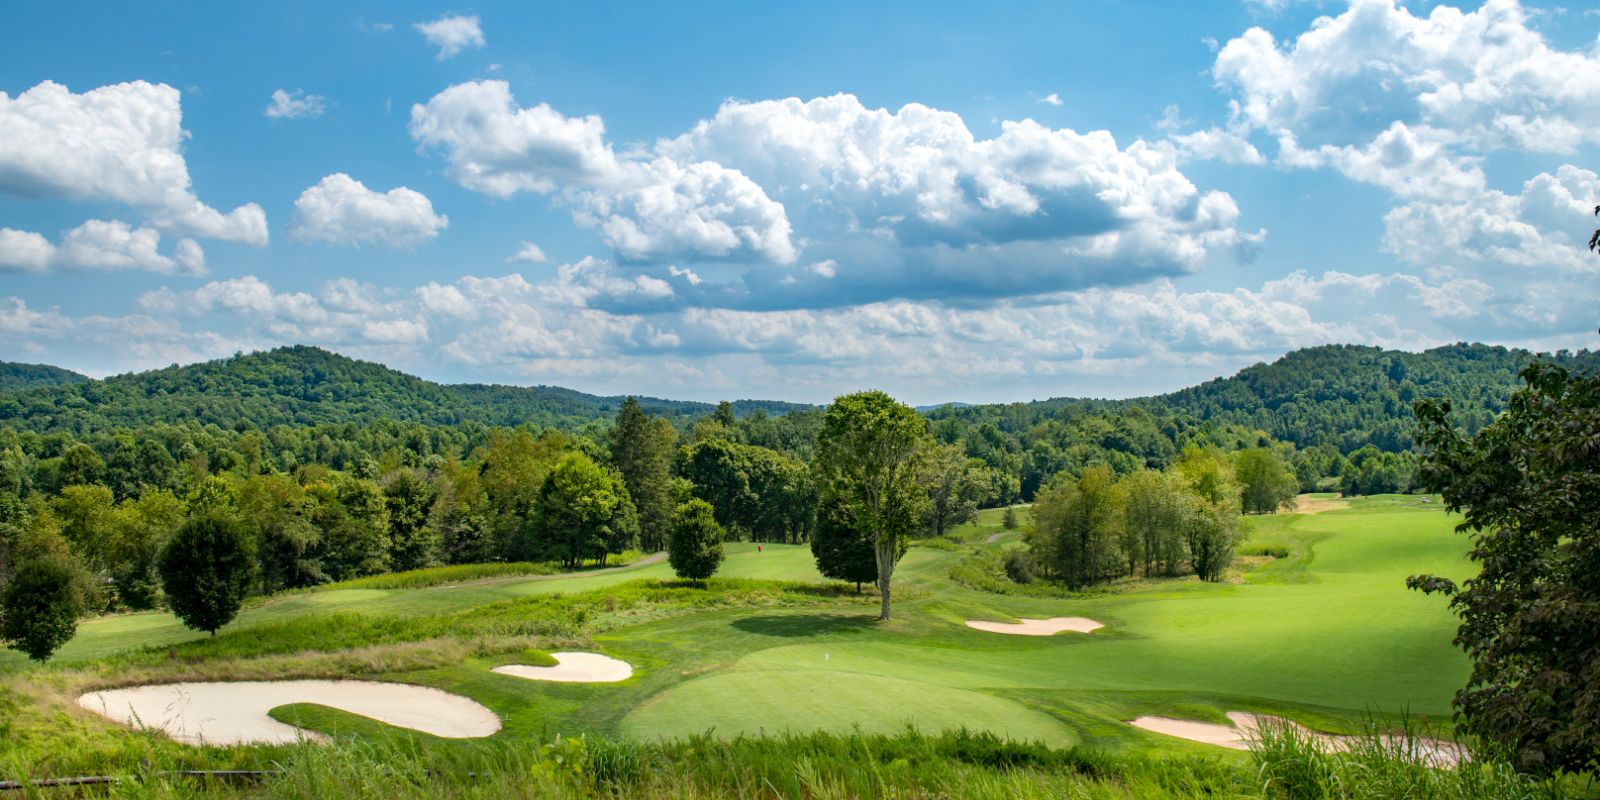 A scenic view of a golf course with lush greenery, sand bunkers, rolling hills, and a partly cloudy blue sky in the background.